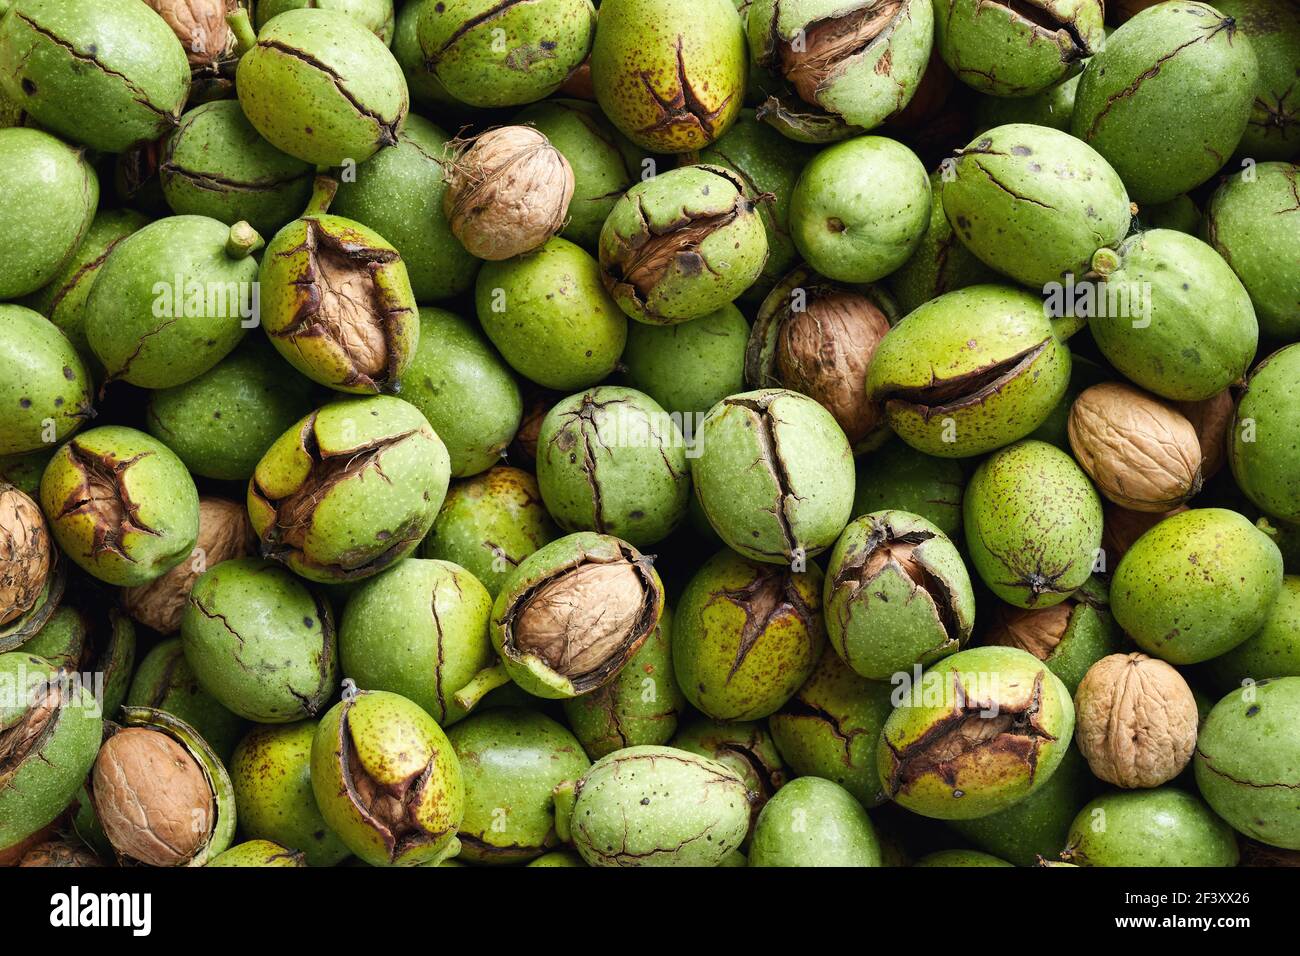 Fresh harvest of organic walnuts in a green shell. Stock Photo